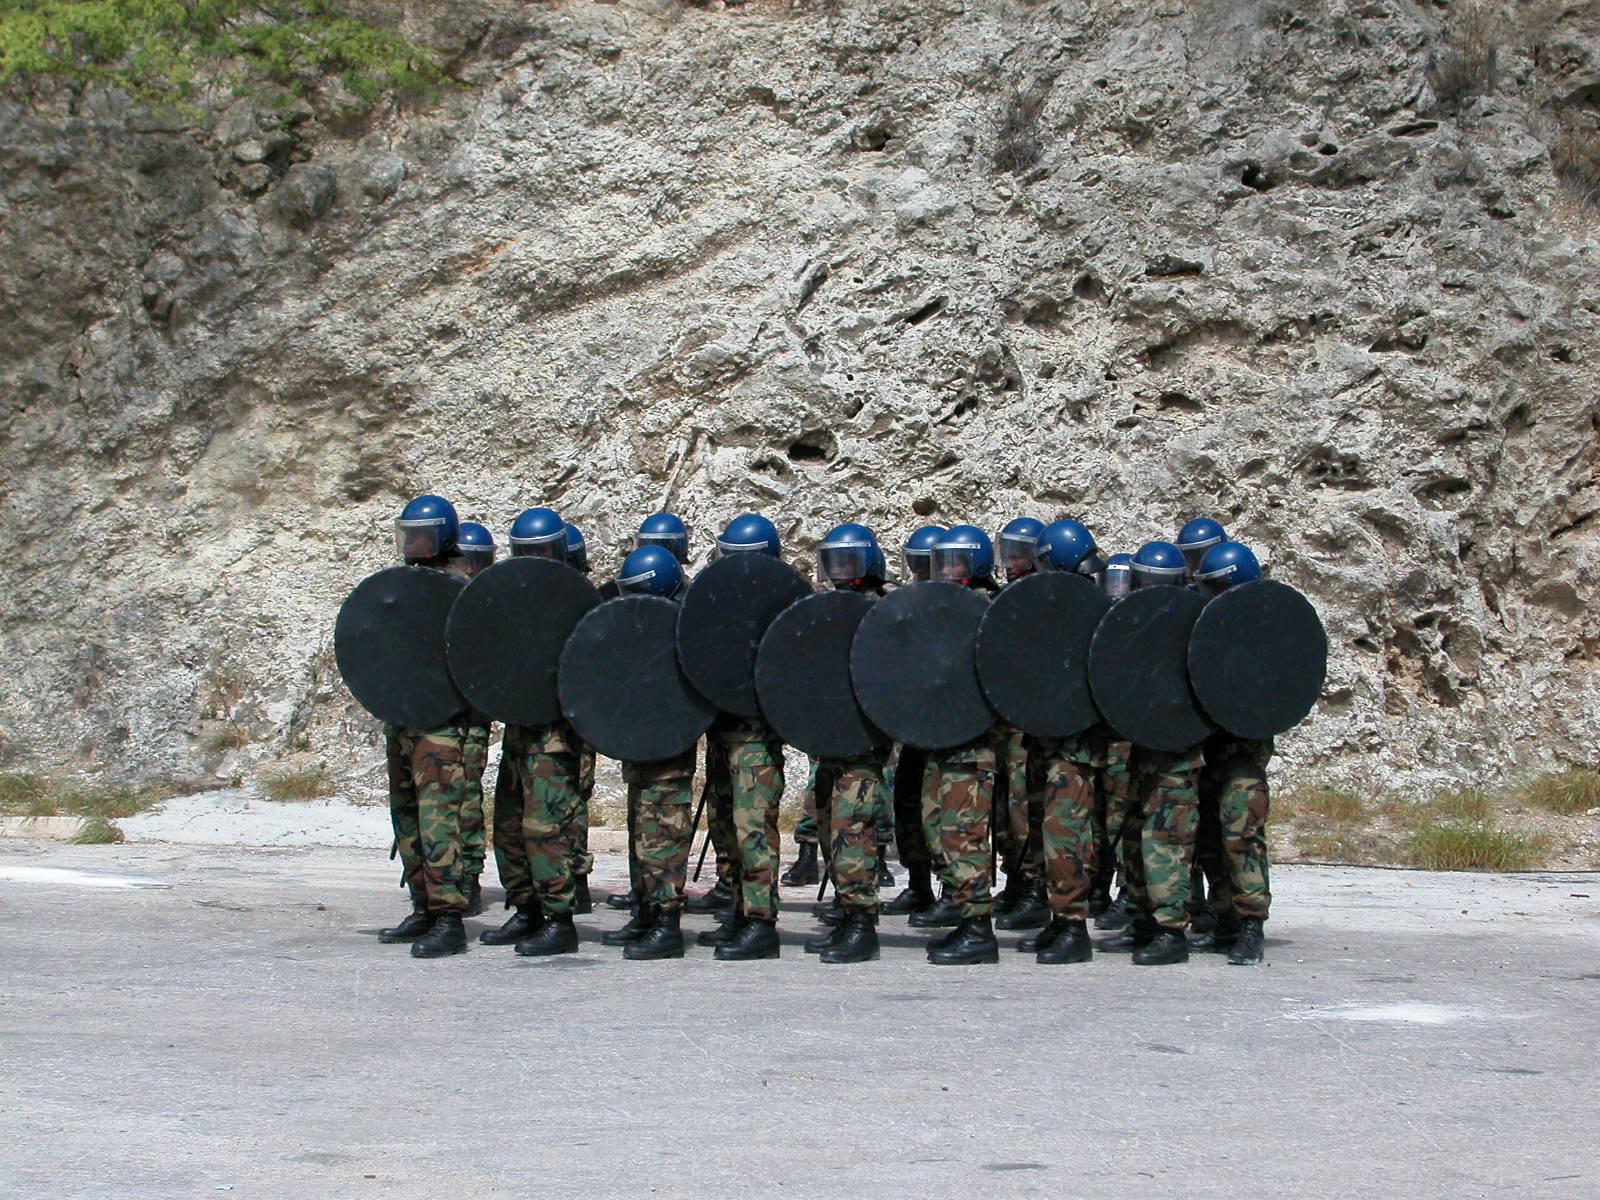 MP military riot control shields shield for fun try adding this image in front of them: http://69.44.157.231/image.php?image=b1capricornbaby002.jpg